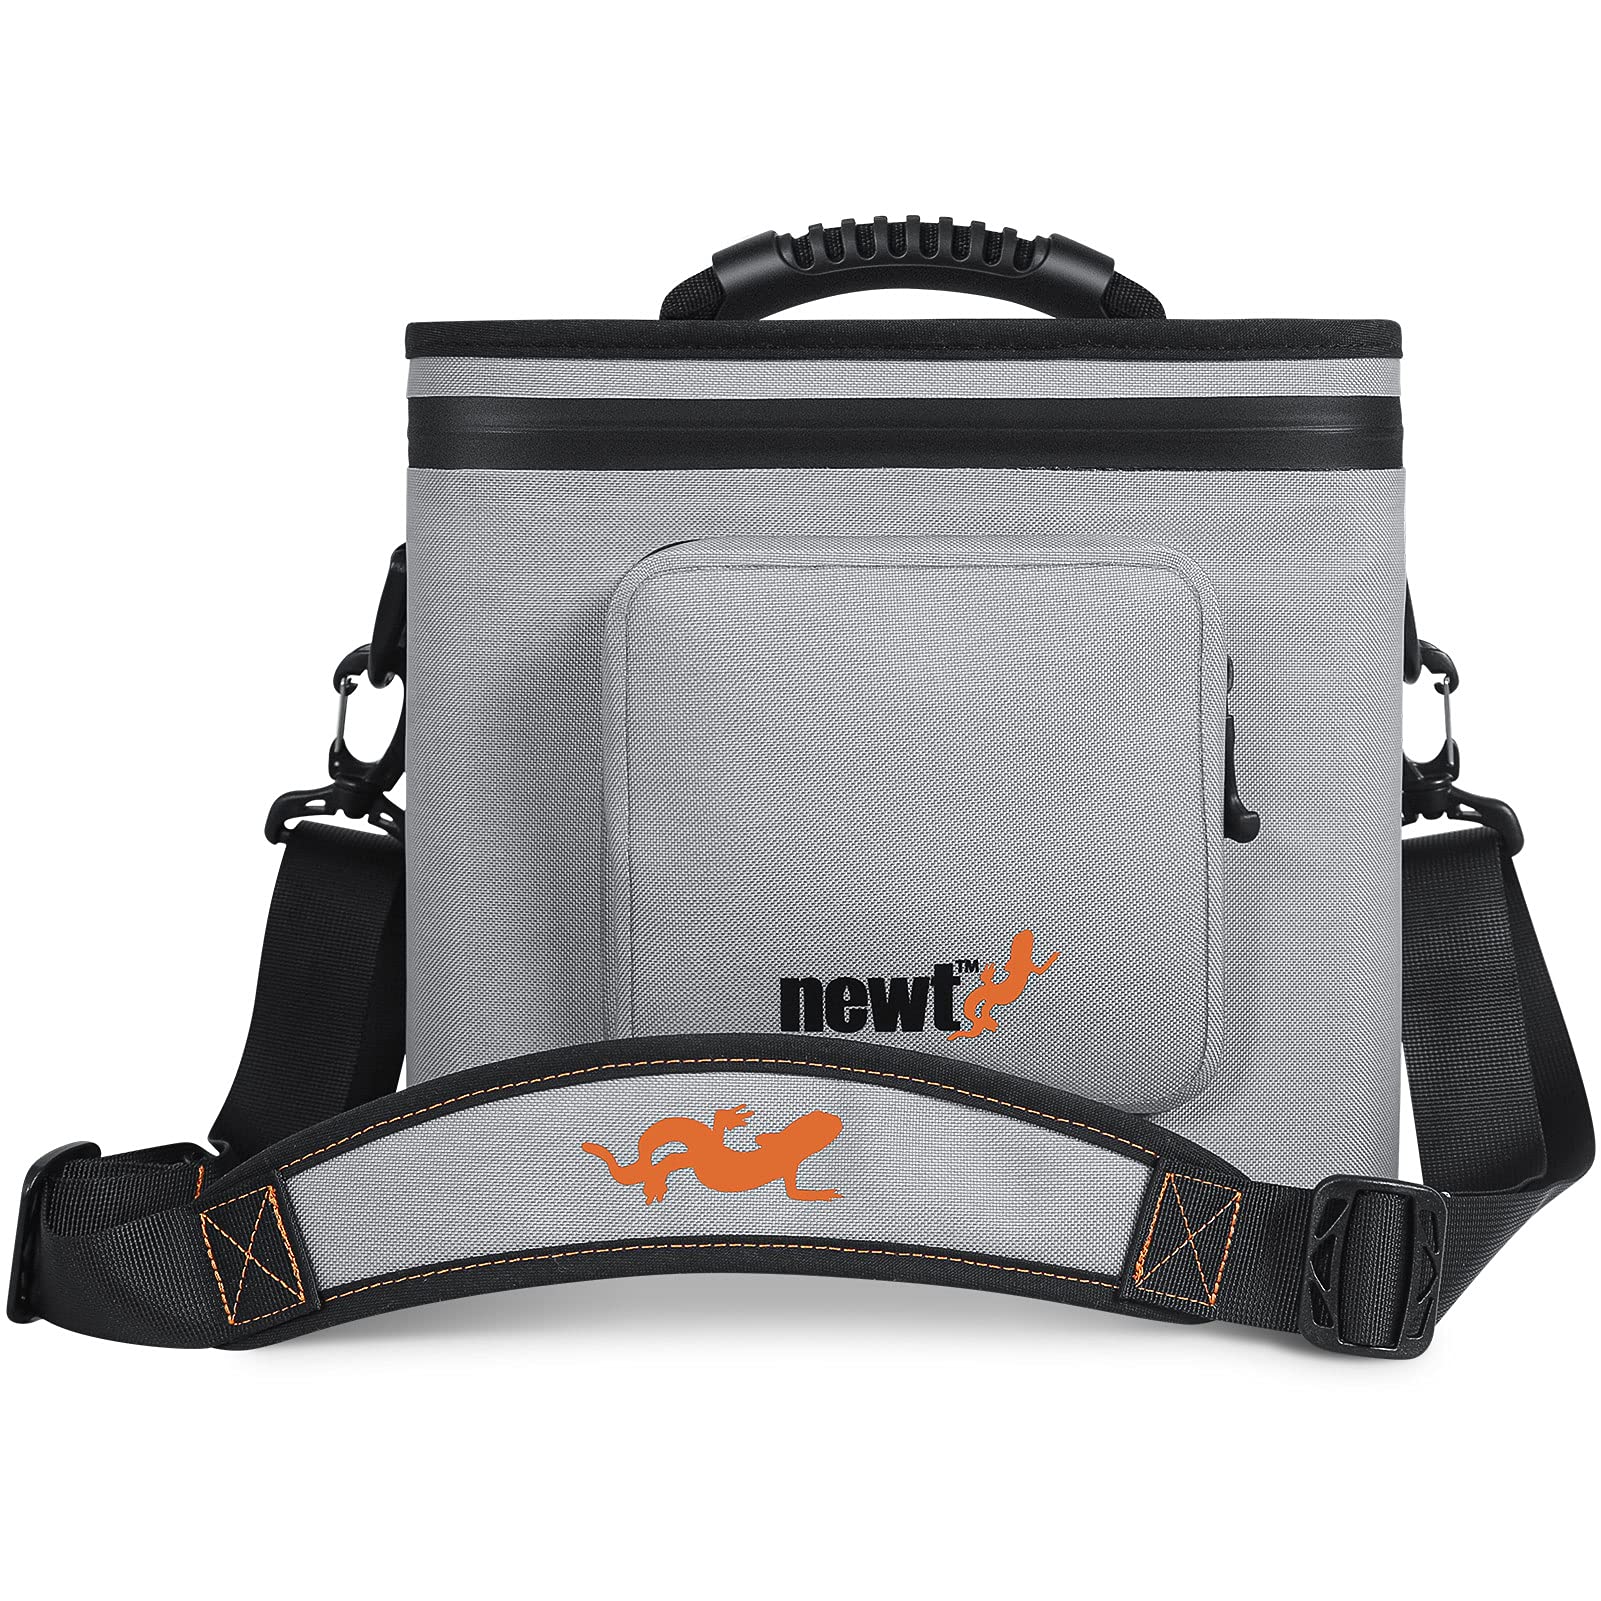 COOS BAY NEWT Fully Waterproof Padded Camera Shoulder Bag with Leak-Proof Zipper, High-Frequency Welded Seams and Removable Padded Inserts. Holds a Single DSLR or Mirrorless Digital Camera